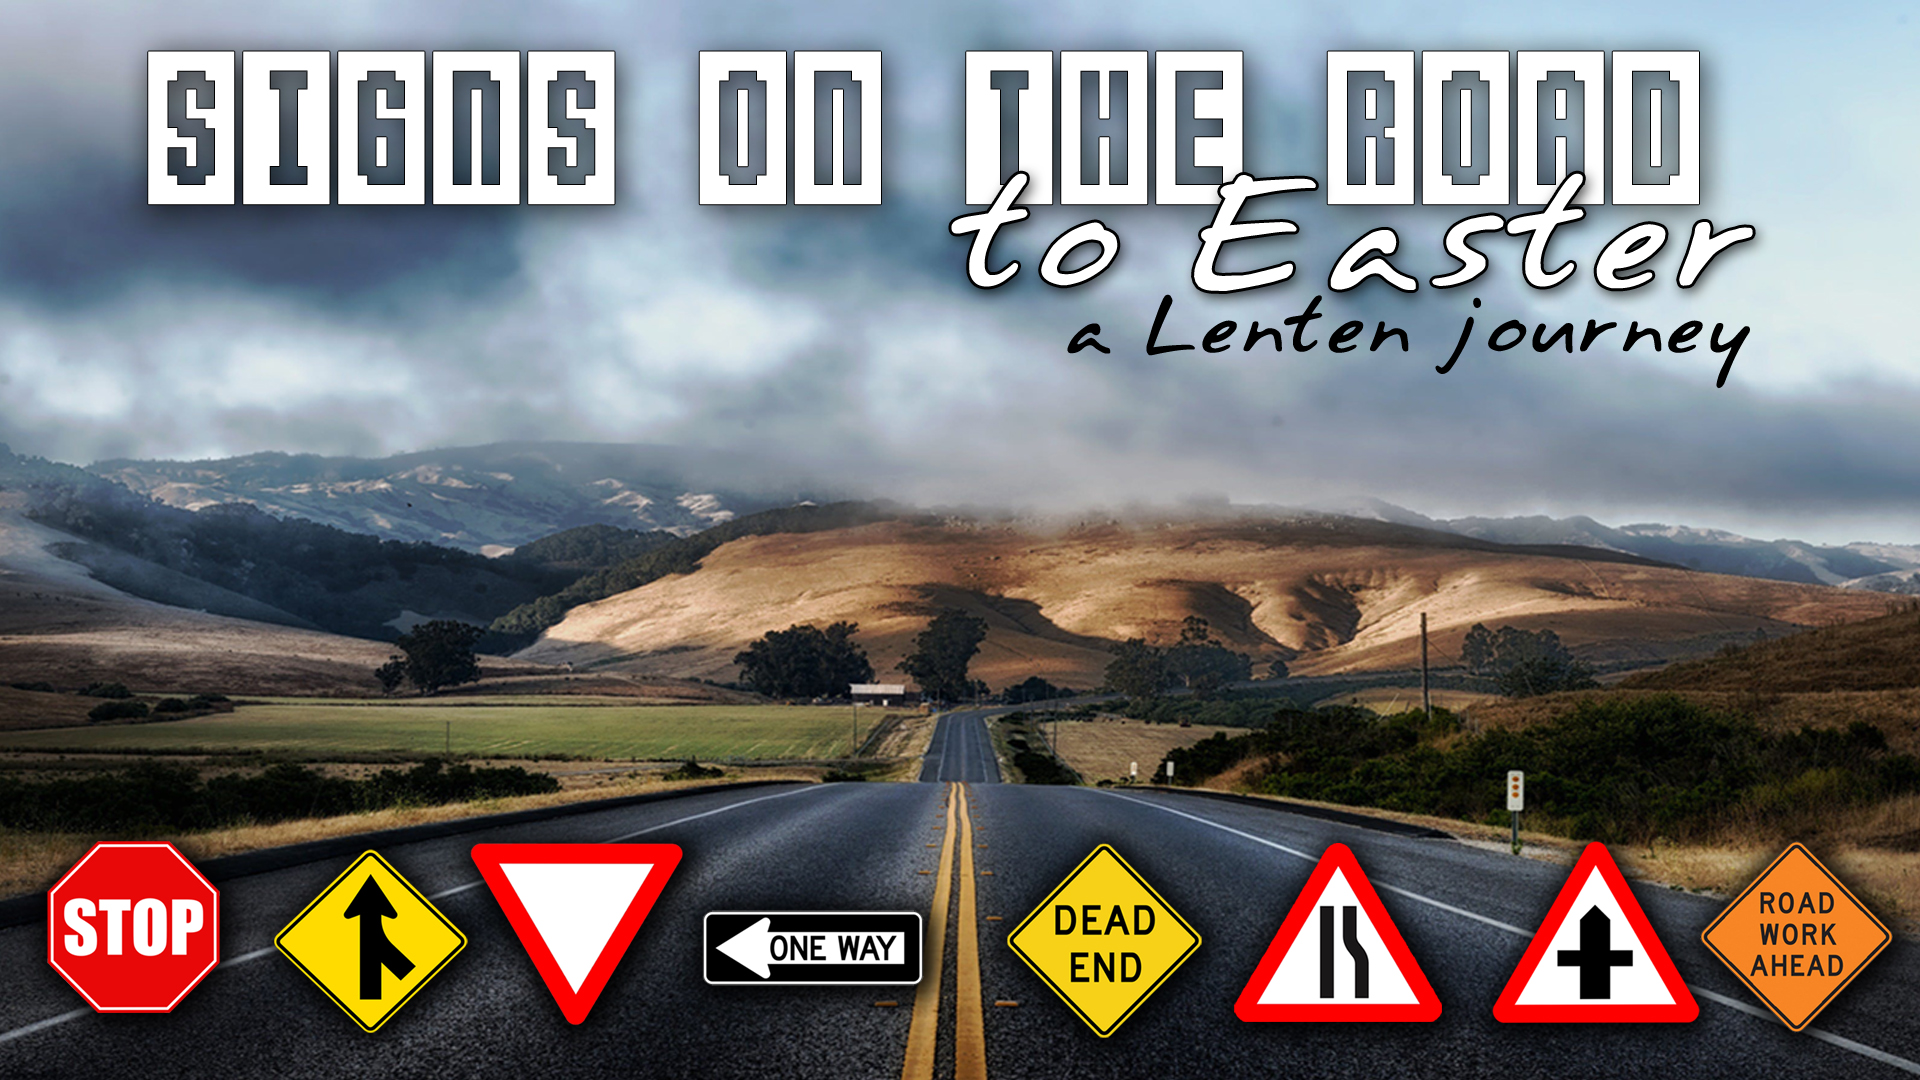 Signs on the road to Easter: One Way